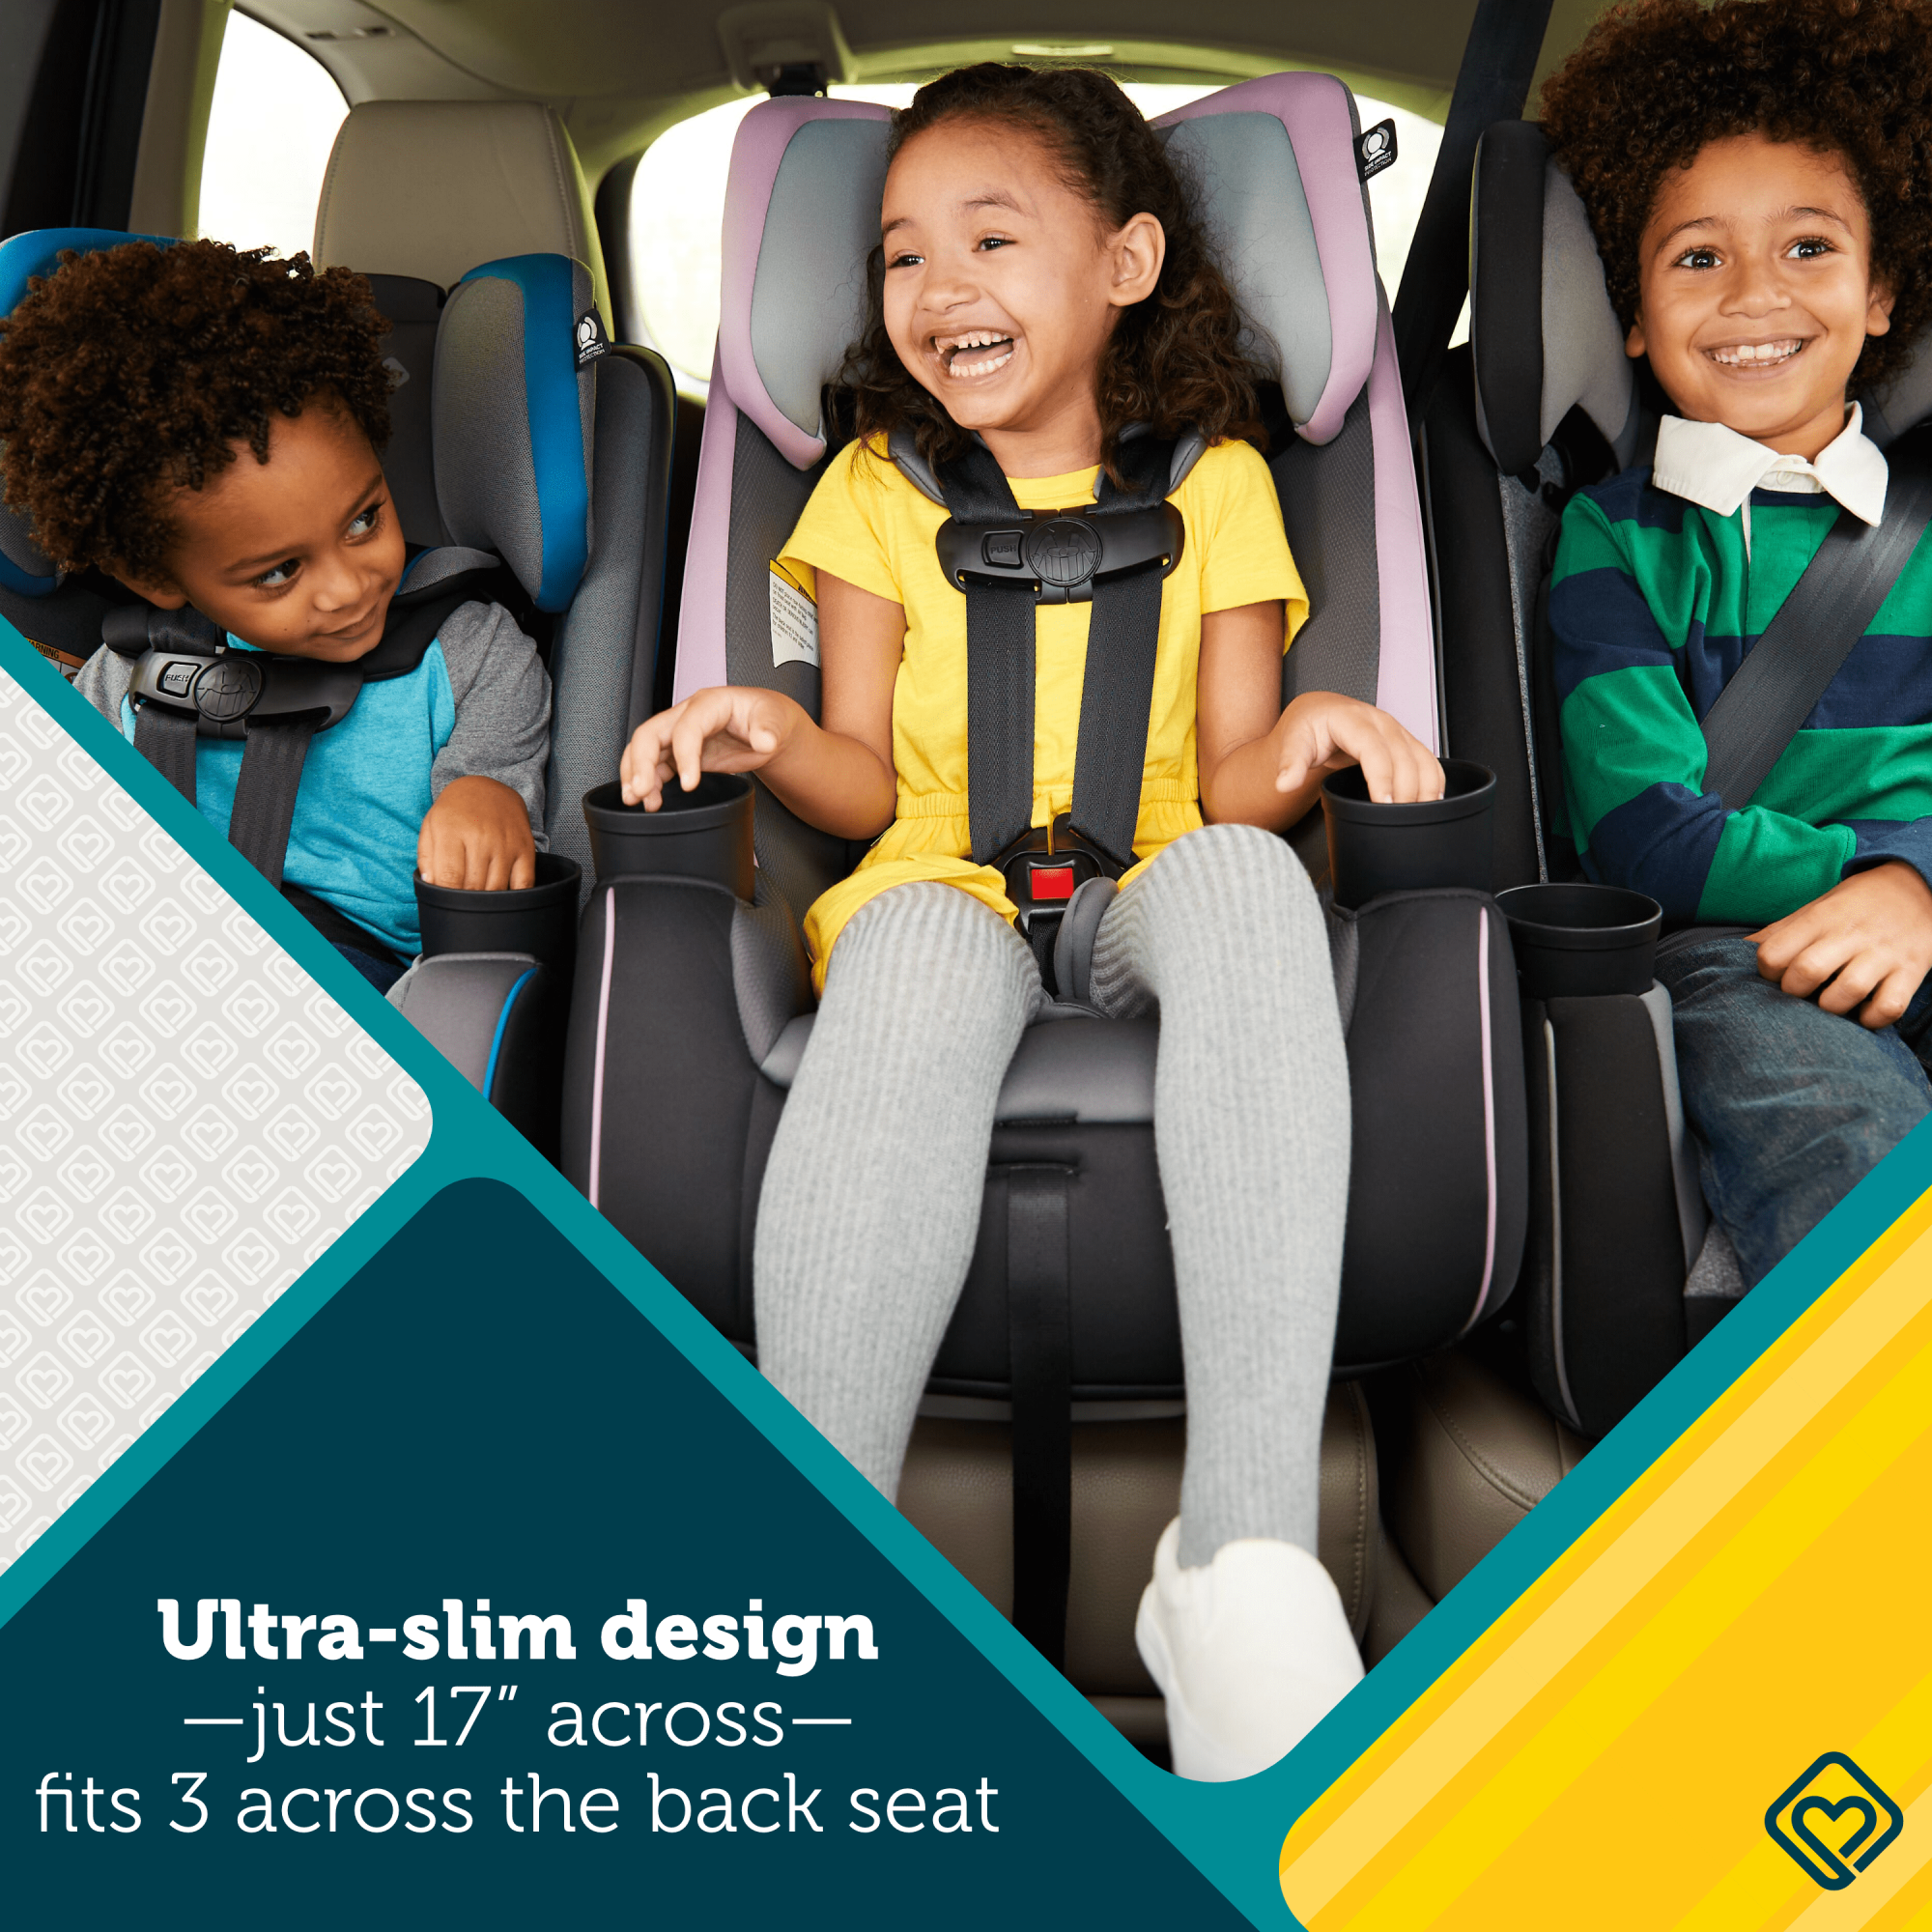 TriMate™ All-in-One Convertible Car Seat - ultra-slim design - just 17" across - fits 3 across the back seat